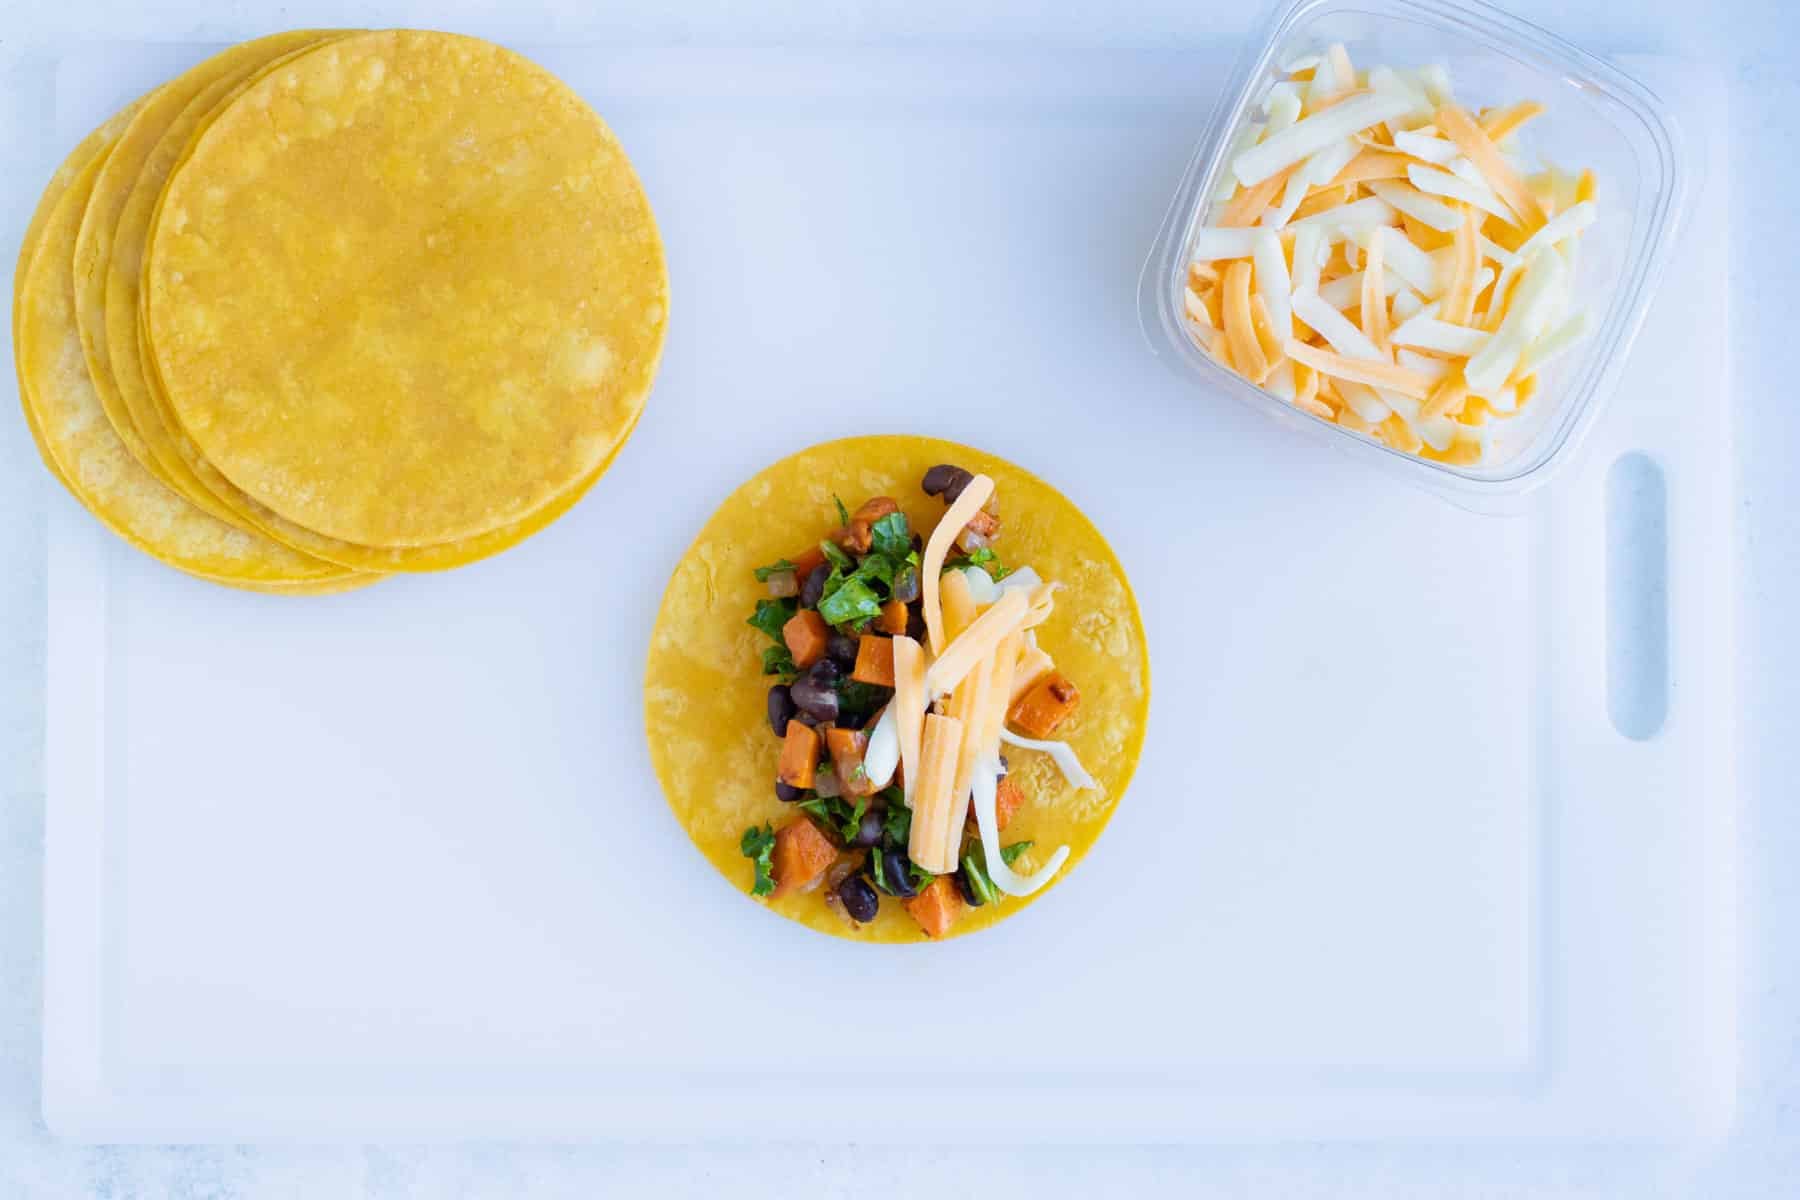 Corn tortillas are filled with the sweet potato black bean filling and shredded cheese.